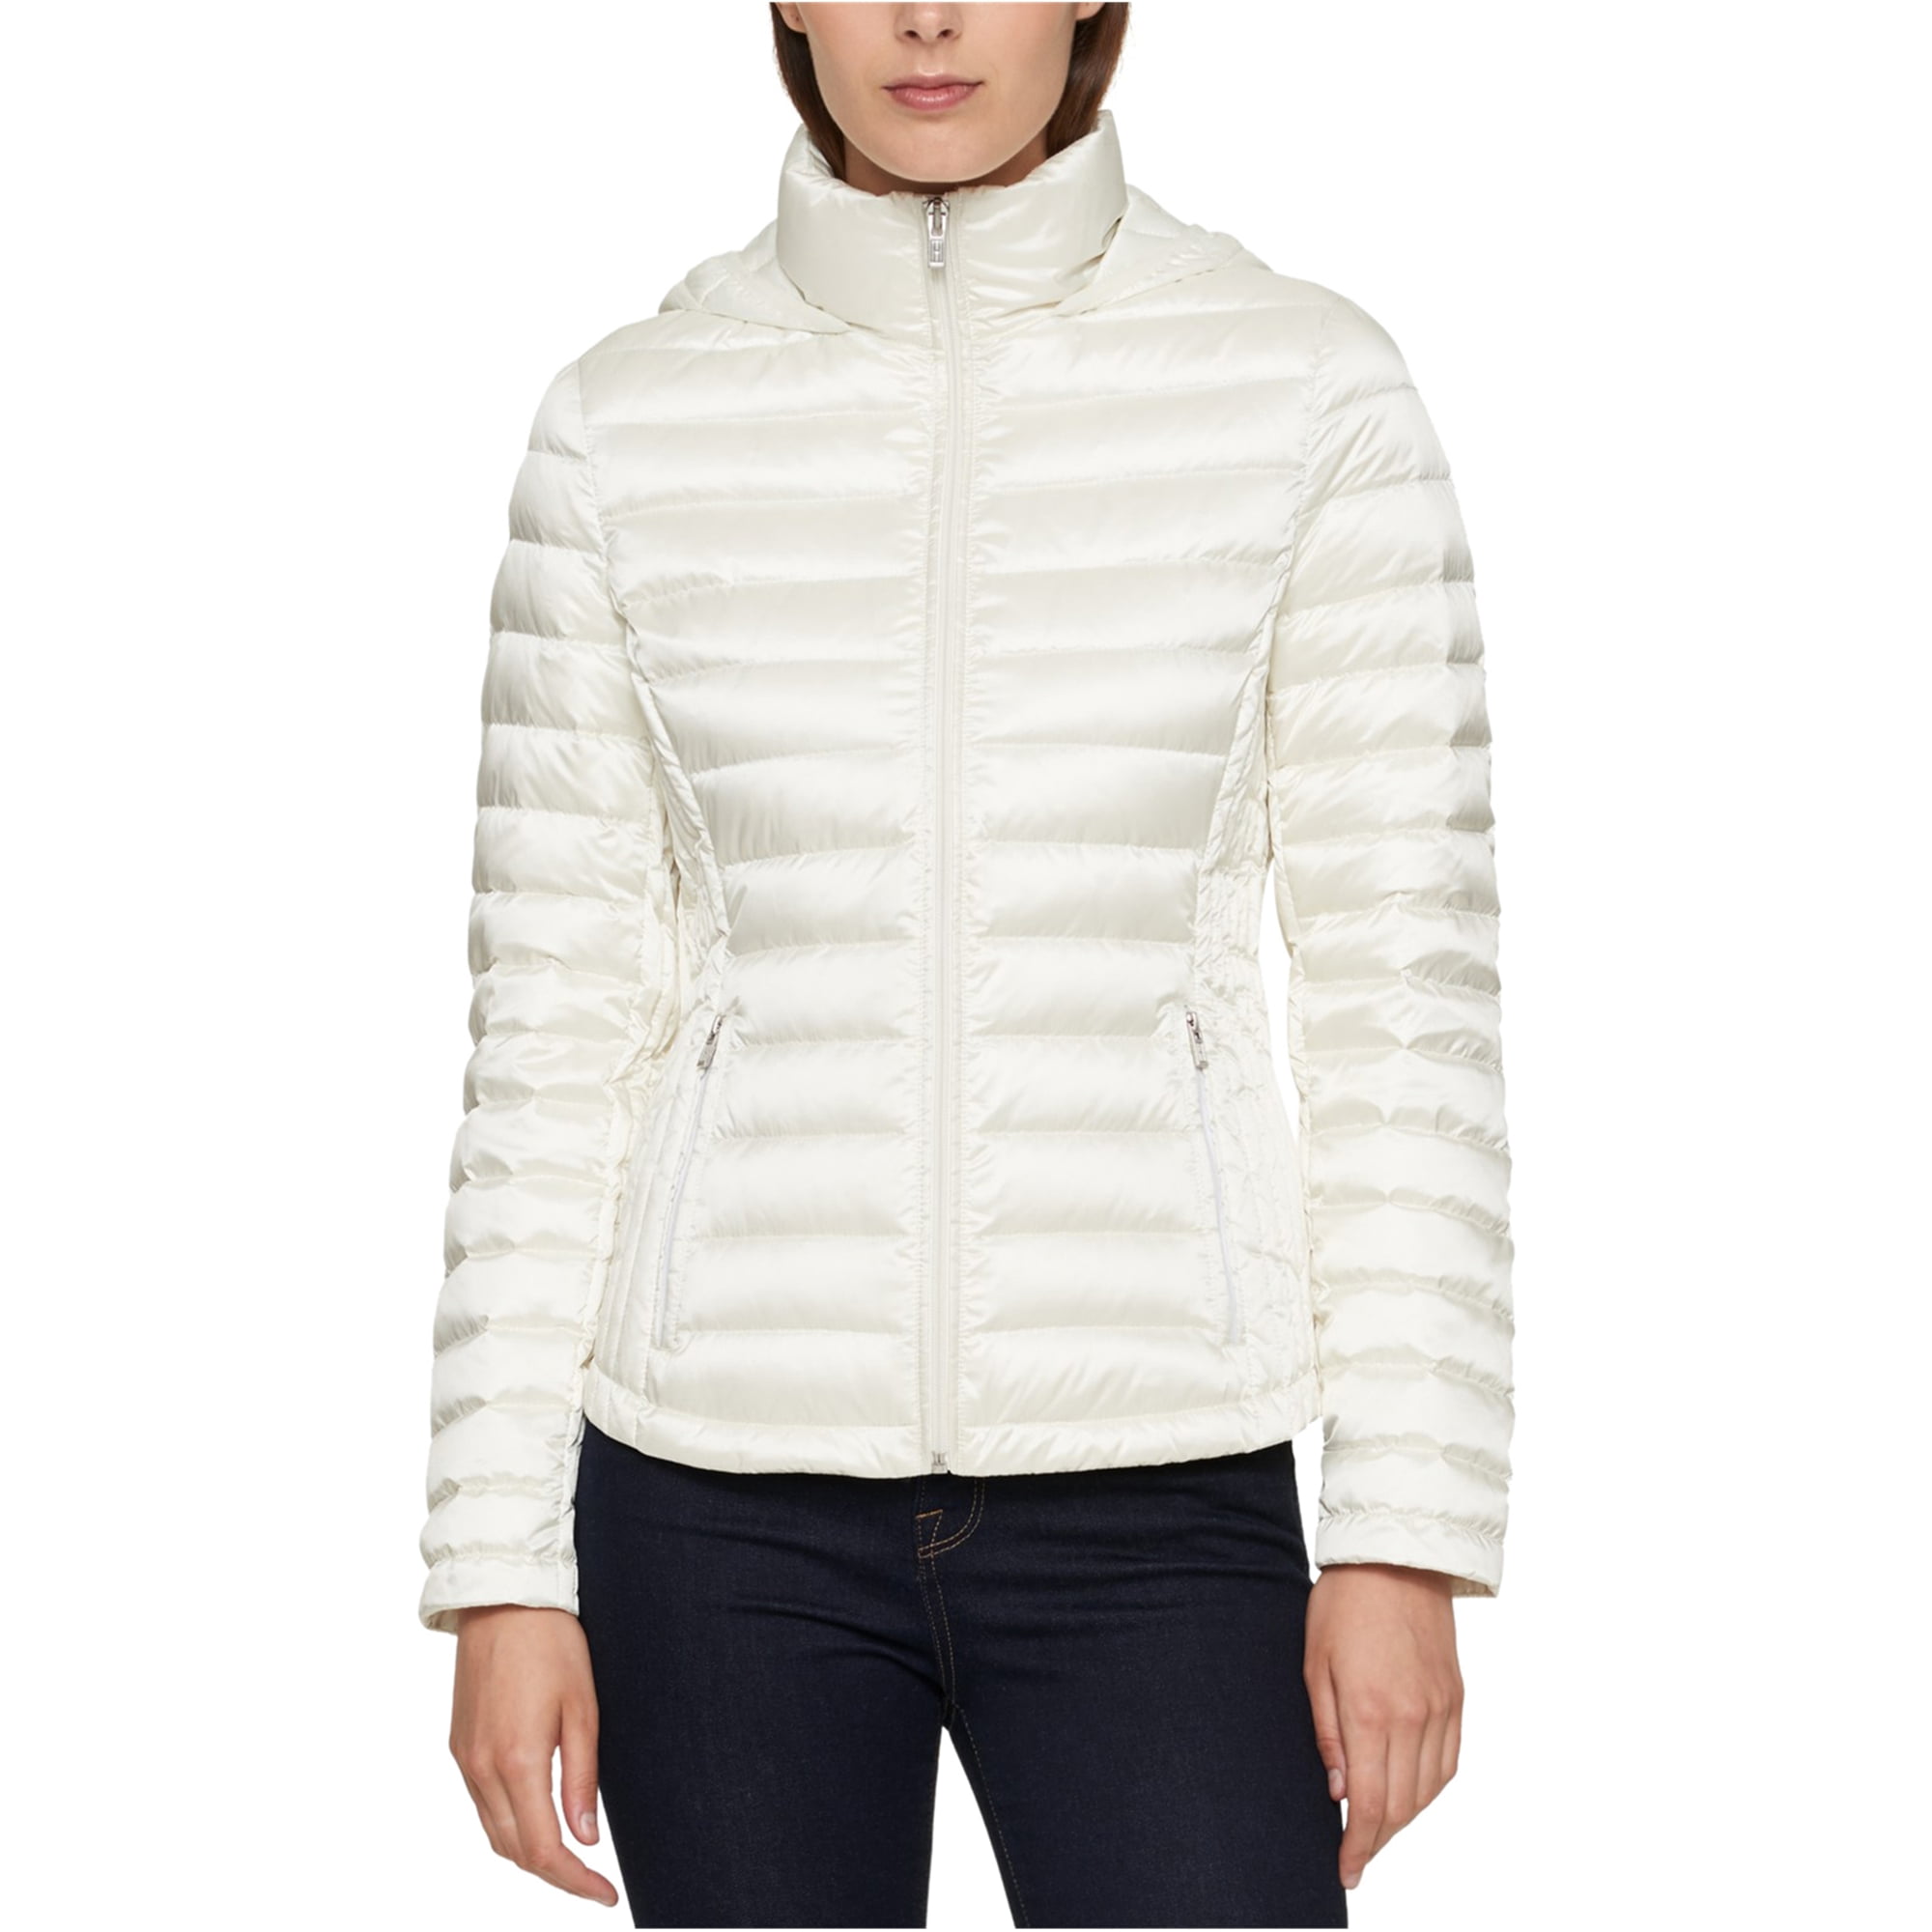 Tommy Hilfiger - Tommy Hilfiger Womens Packable Hooded Puffer Jacket ...